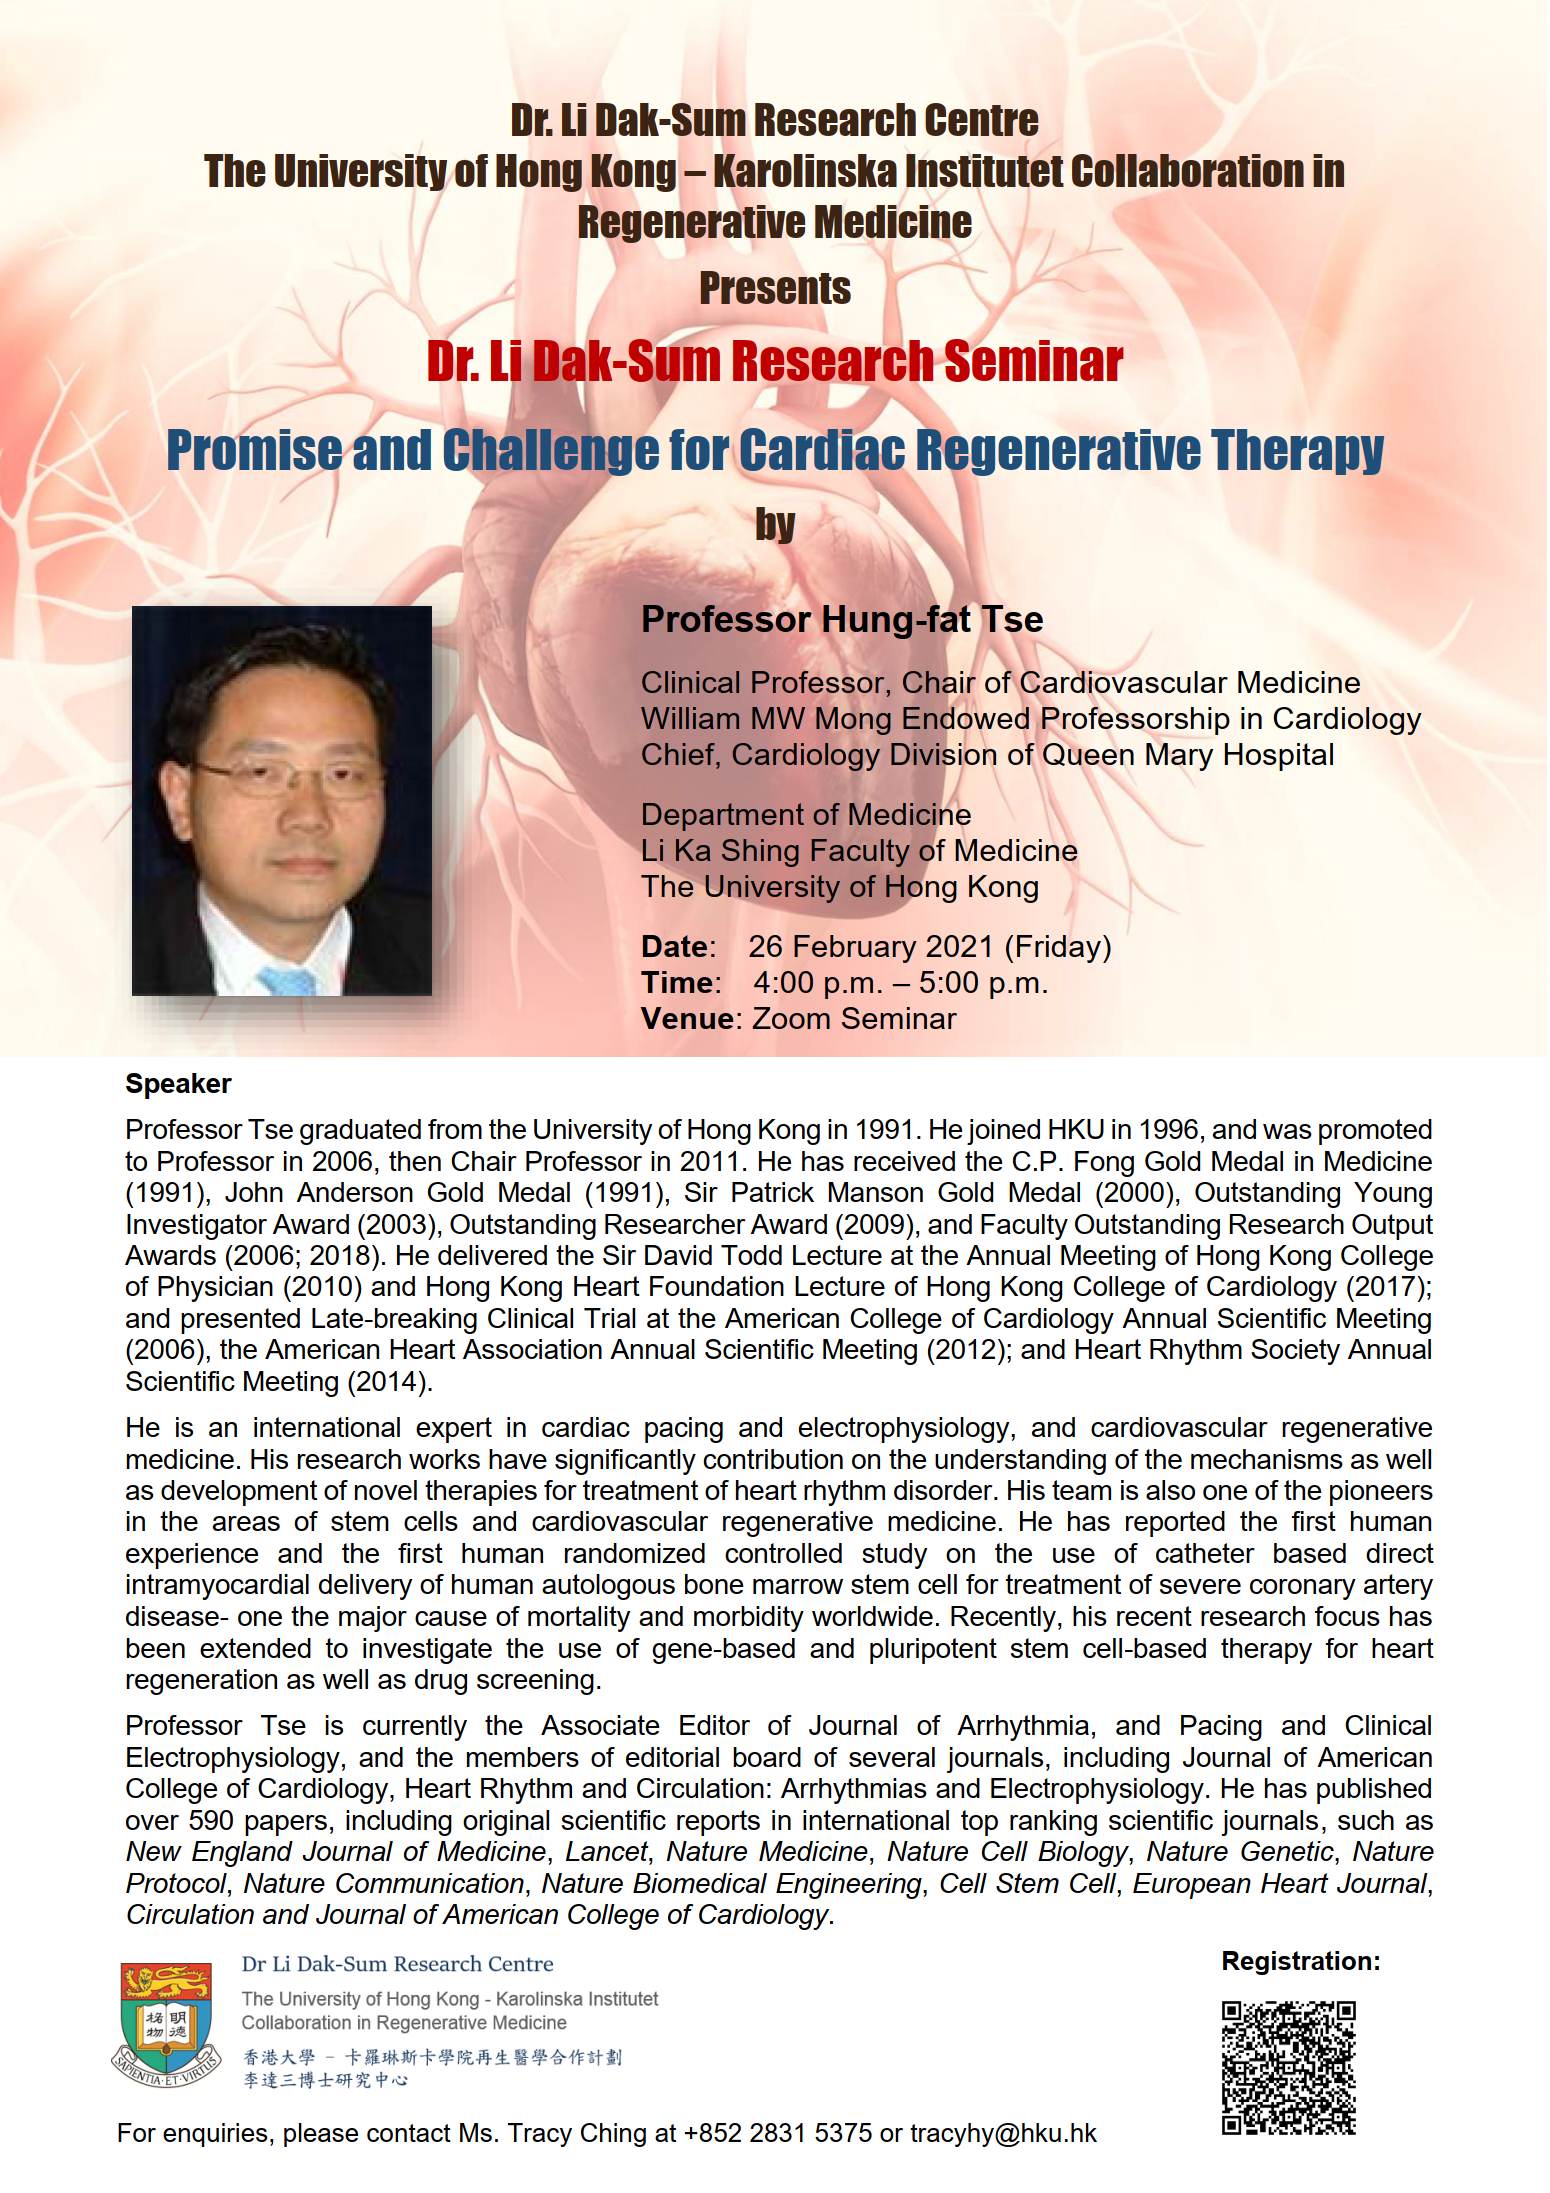 [Dr. Li Dak-Sum Research Seminar] Promise and Challenge for Cardiac Regenerative Therapy by Professor Hung-fat Tse